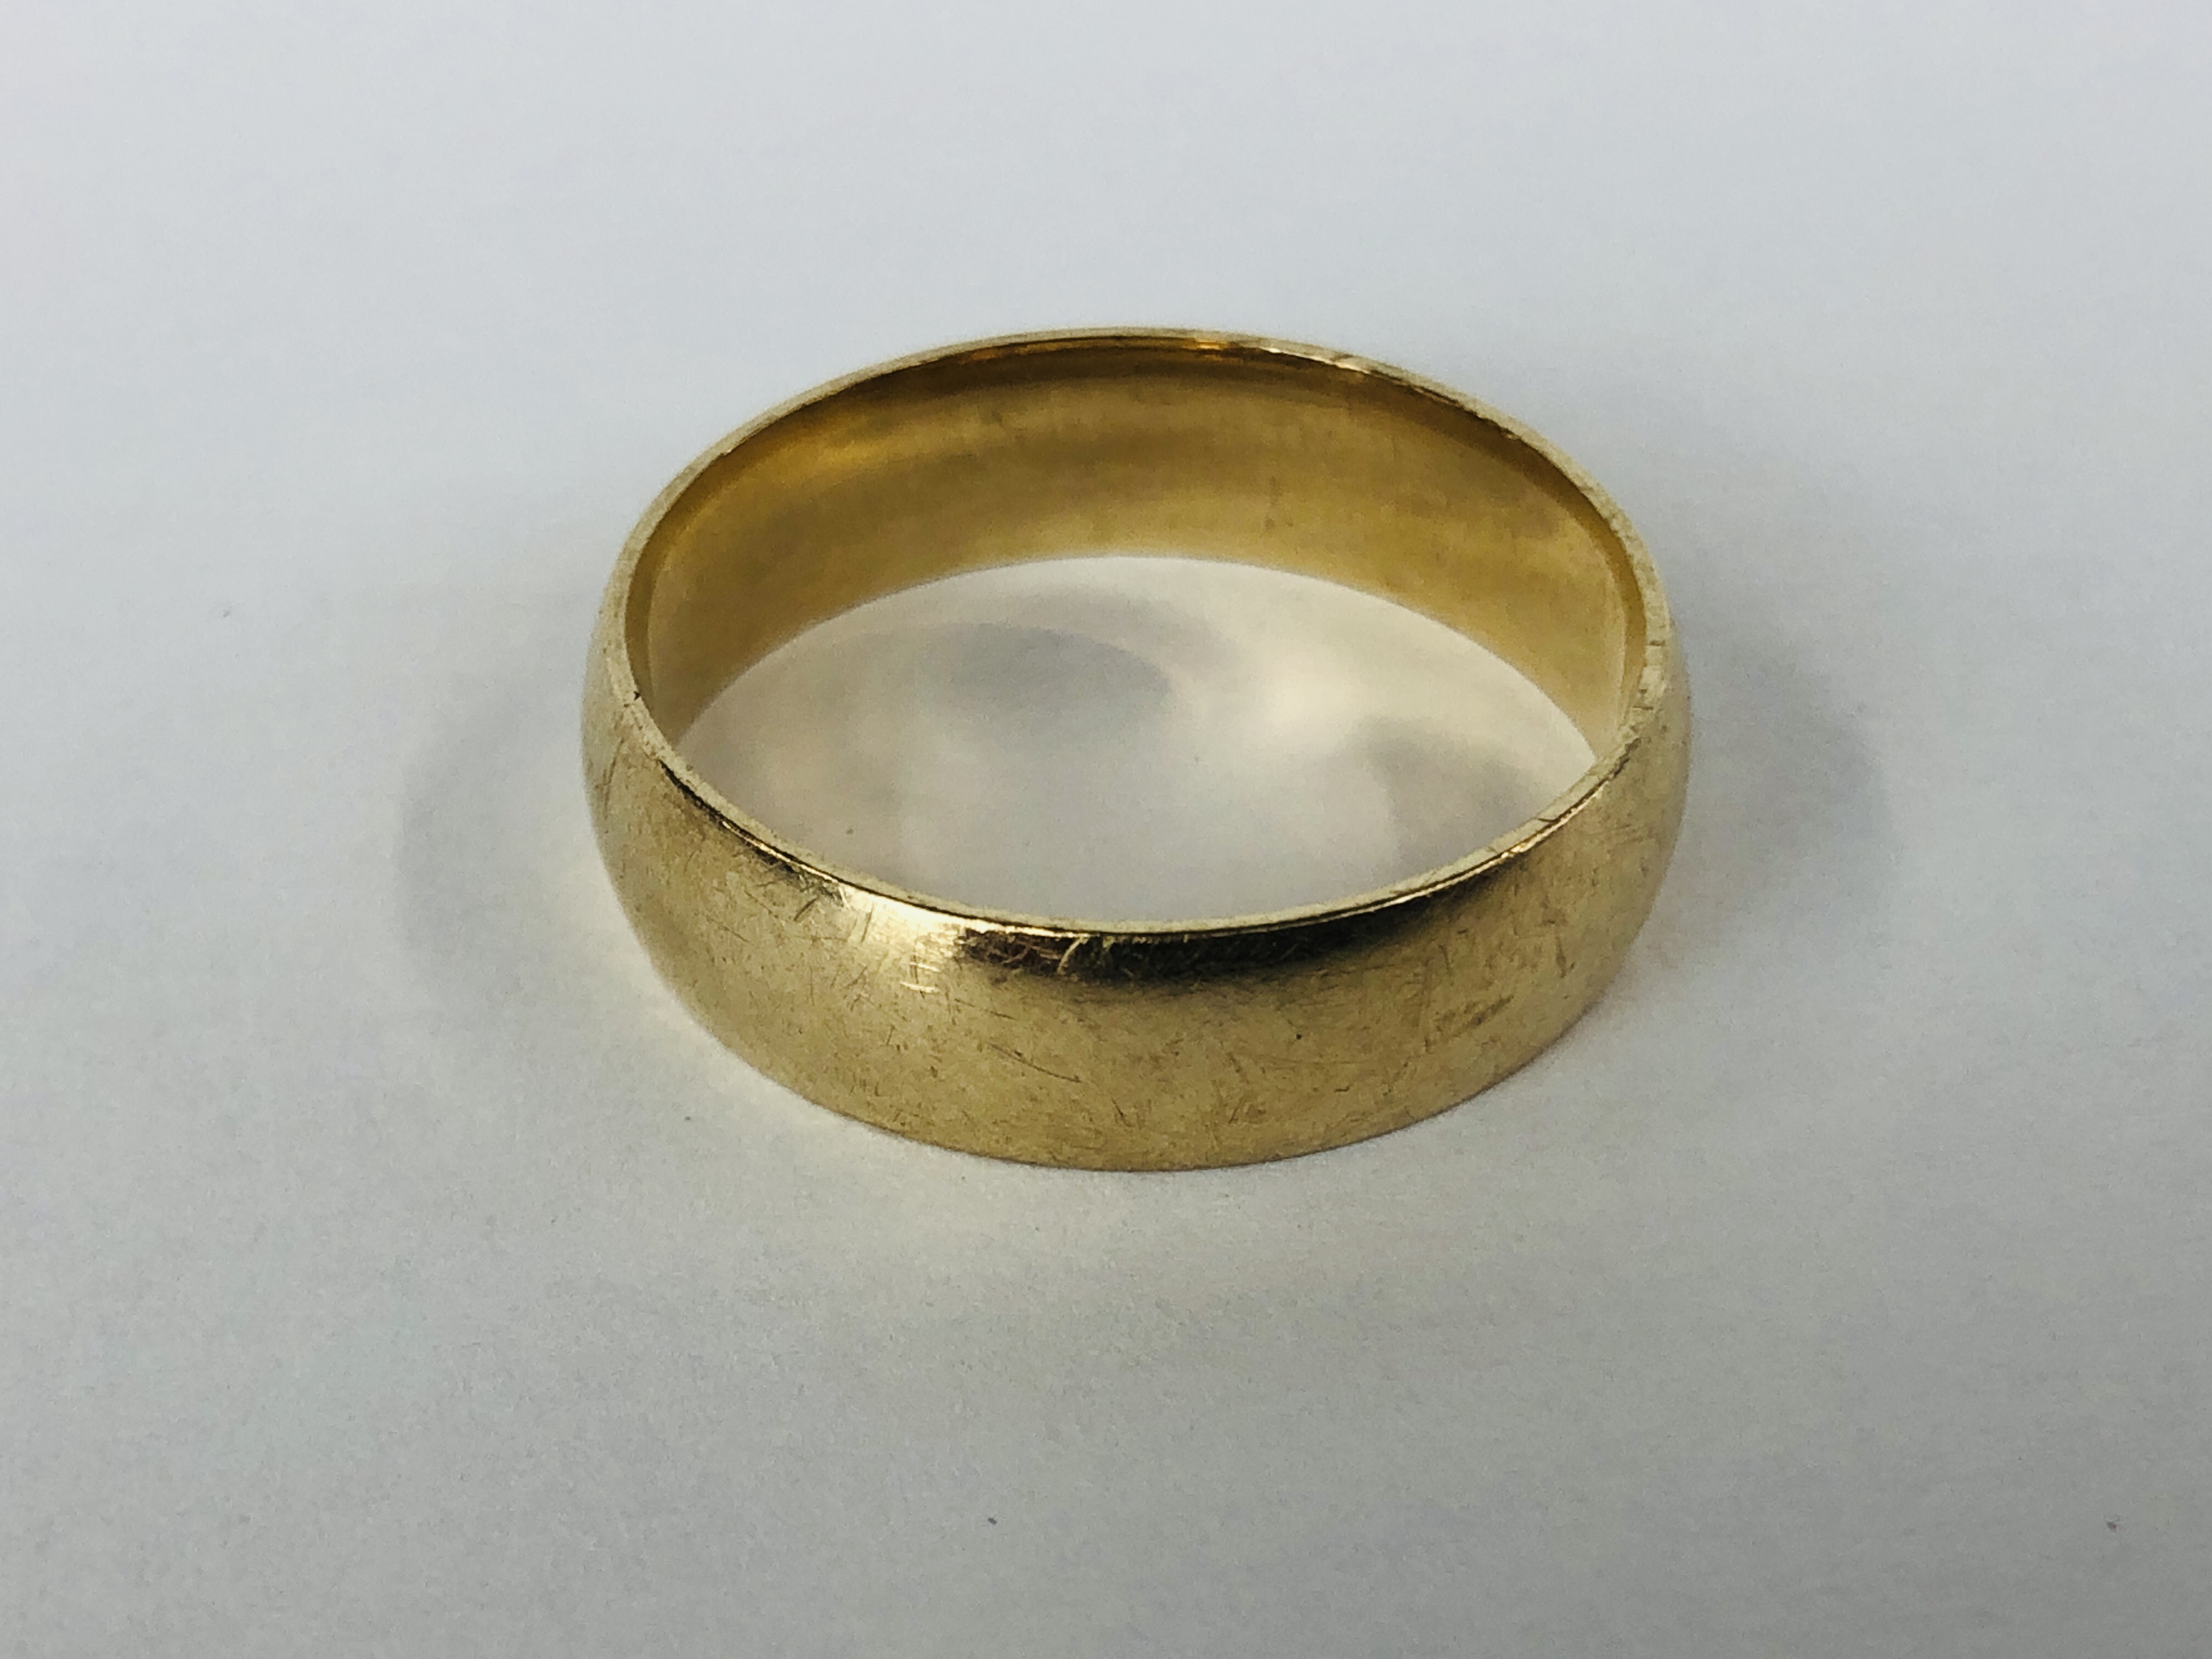 A 9CT GOLD WEDDING BAND MARKED 375. - Image 4 of 7